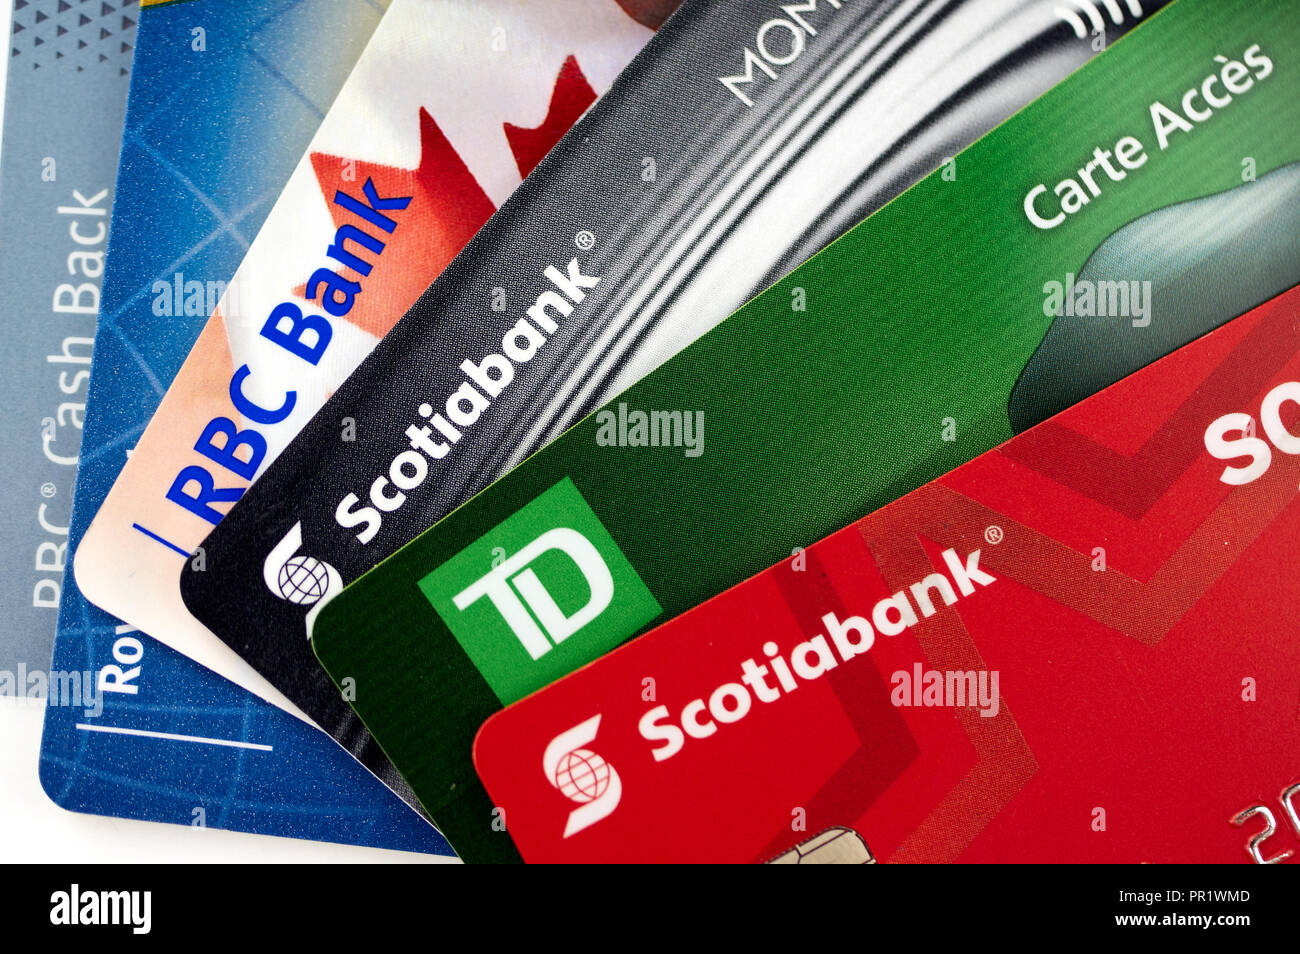 MONTREAL, CANADA - SEPTEMBER 6, 6: Credit cards of different